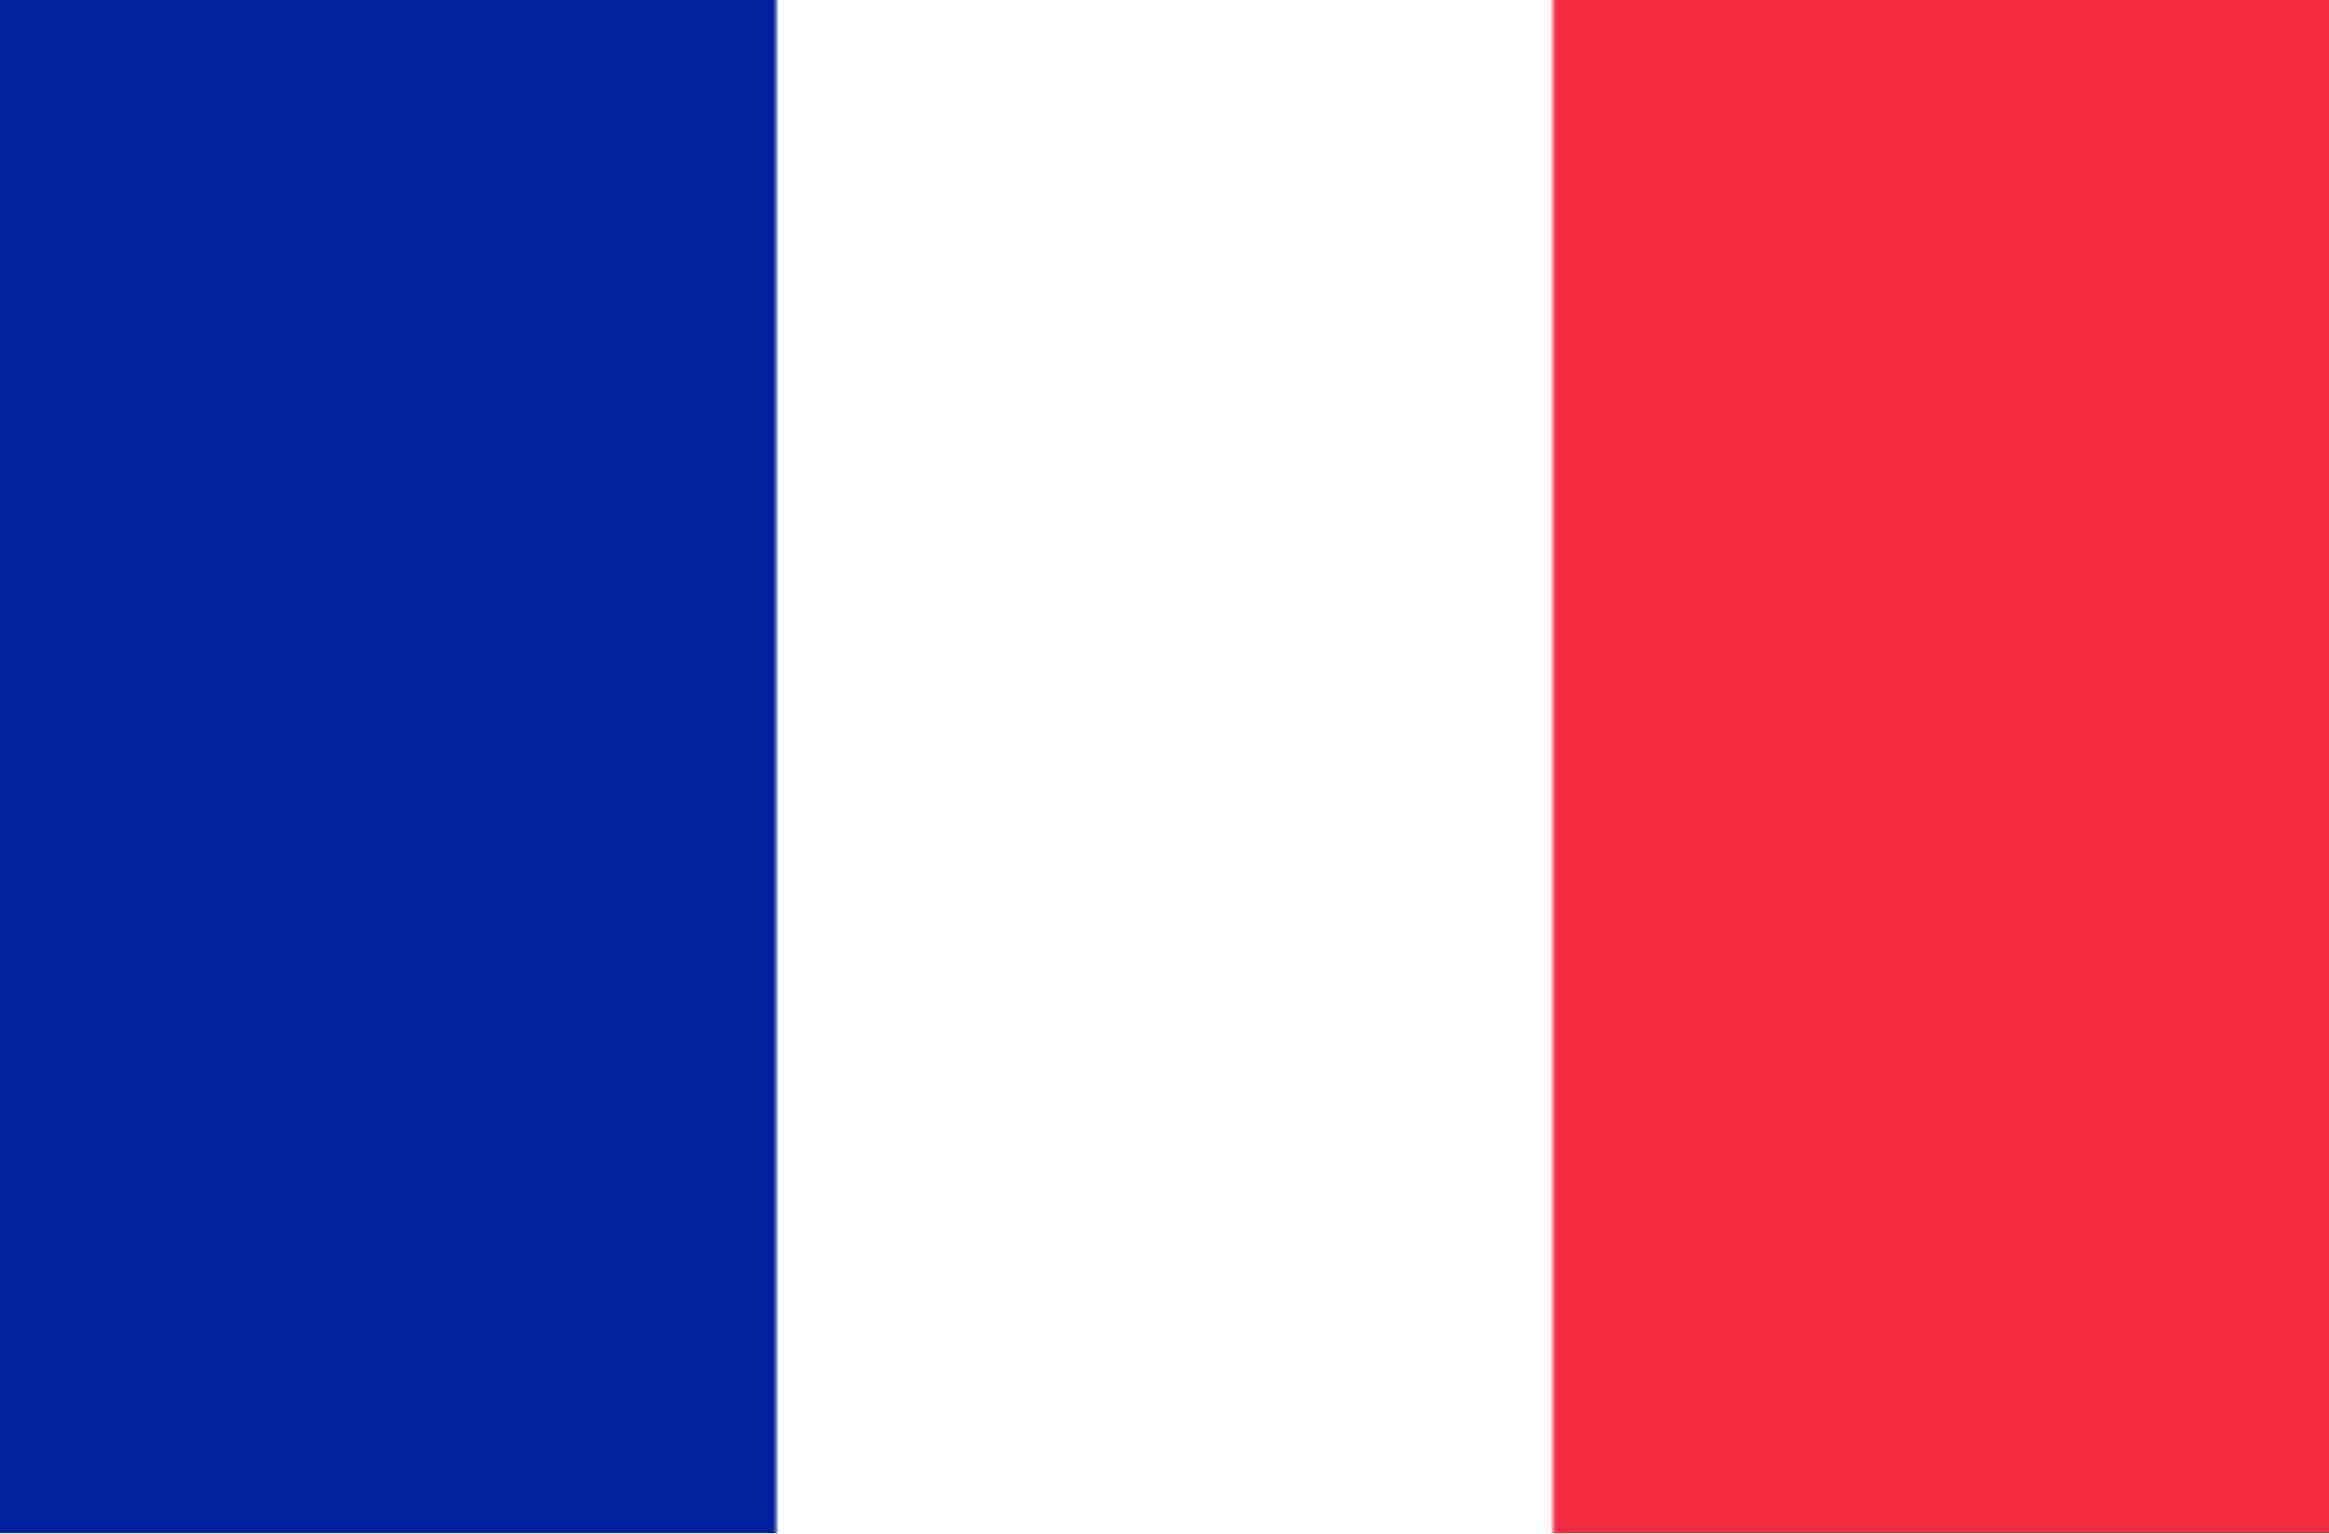 Free download France Flag Wallpaper Cool HD Wallpapers Picture on